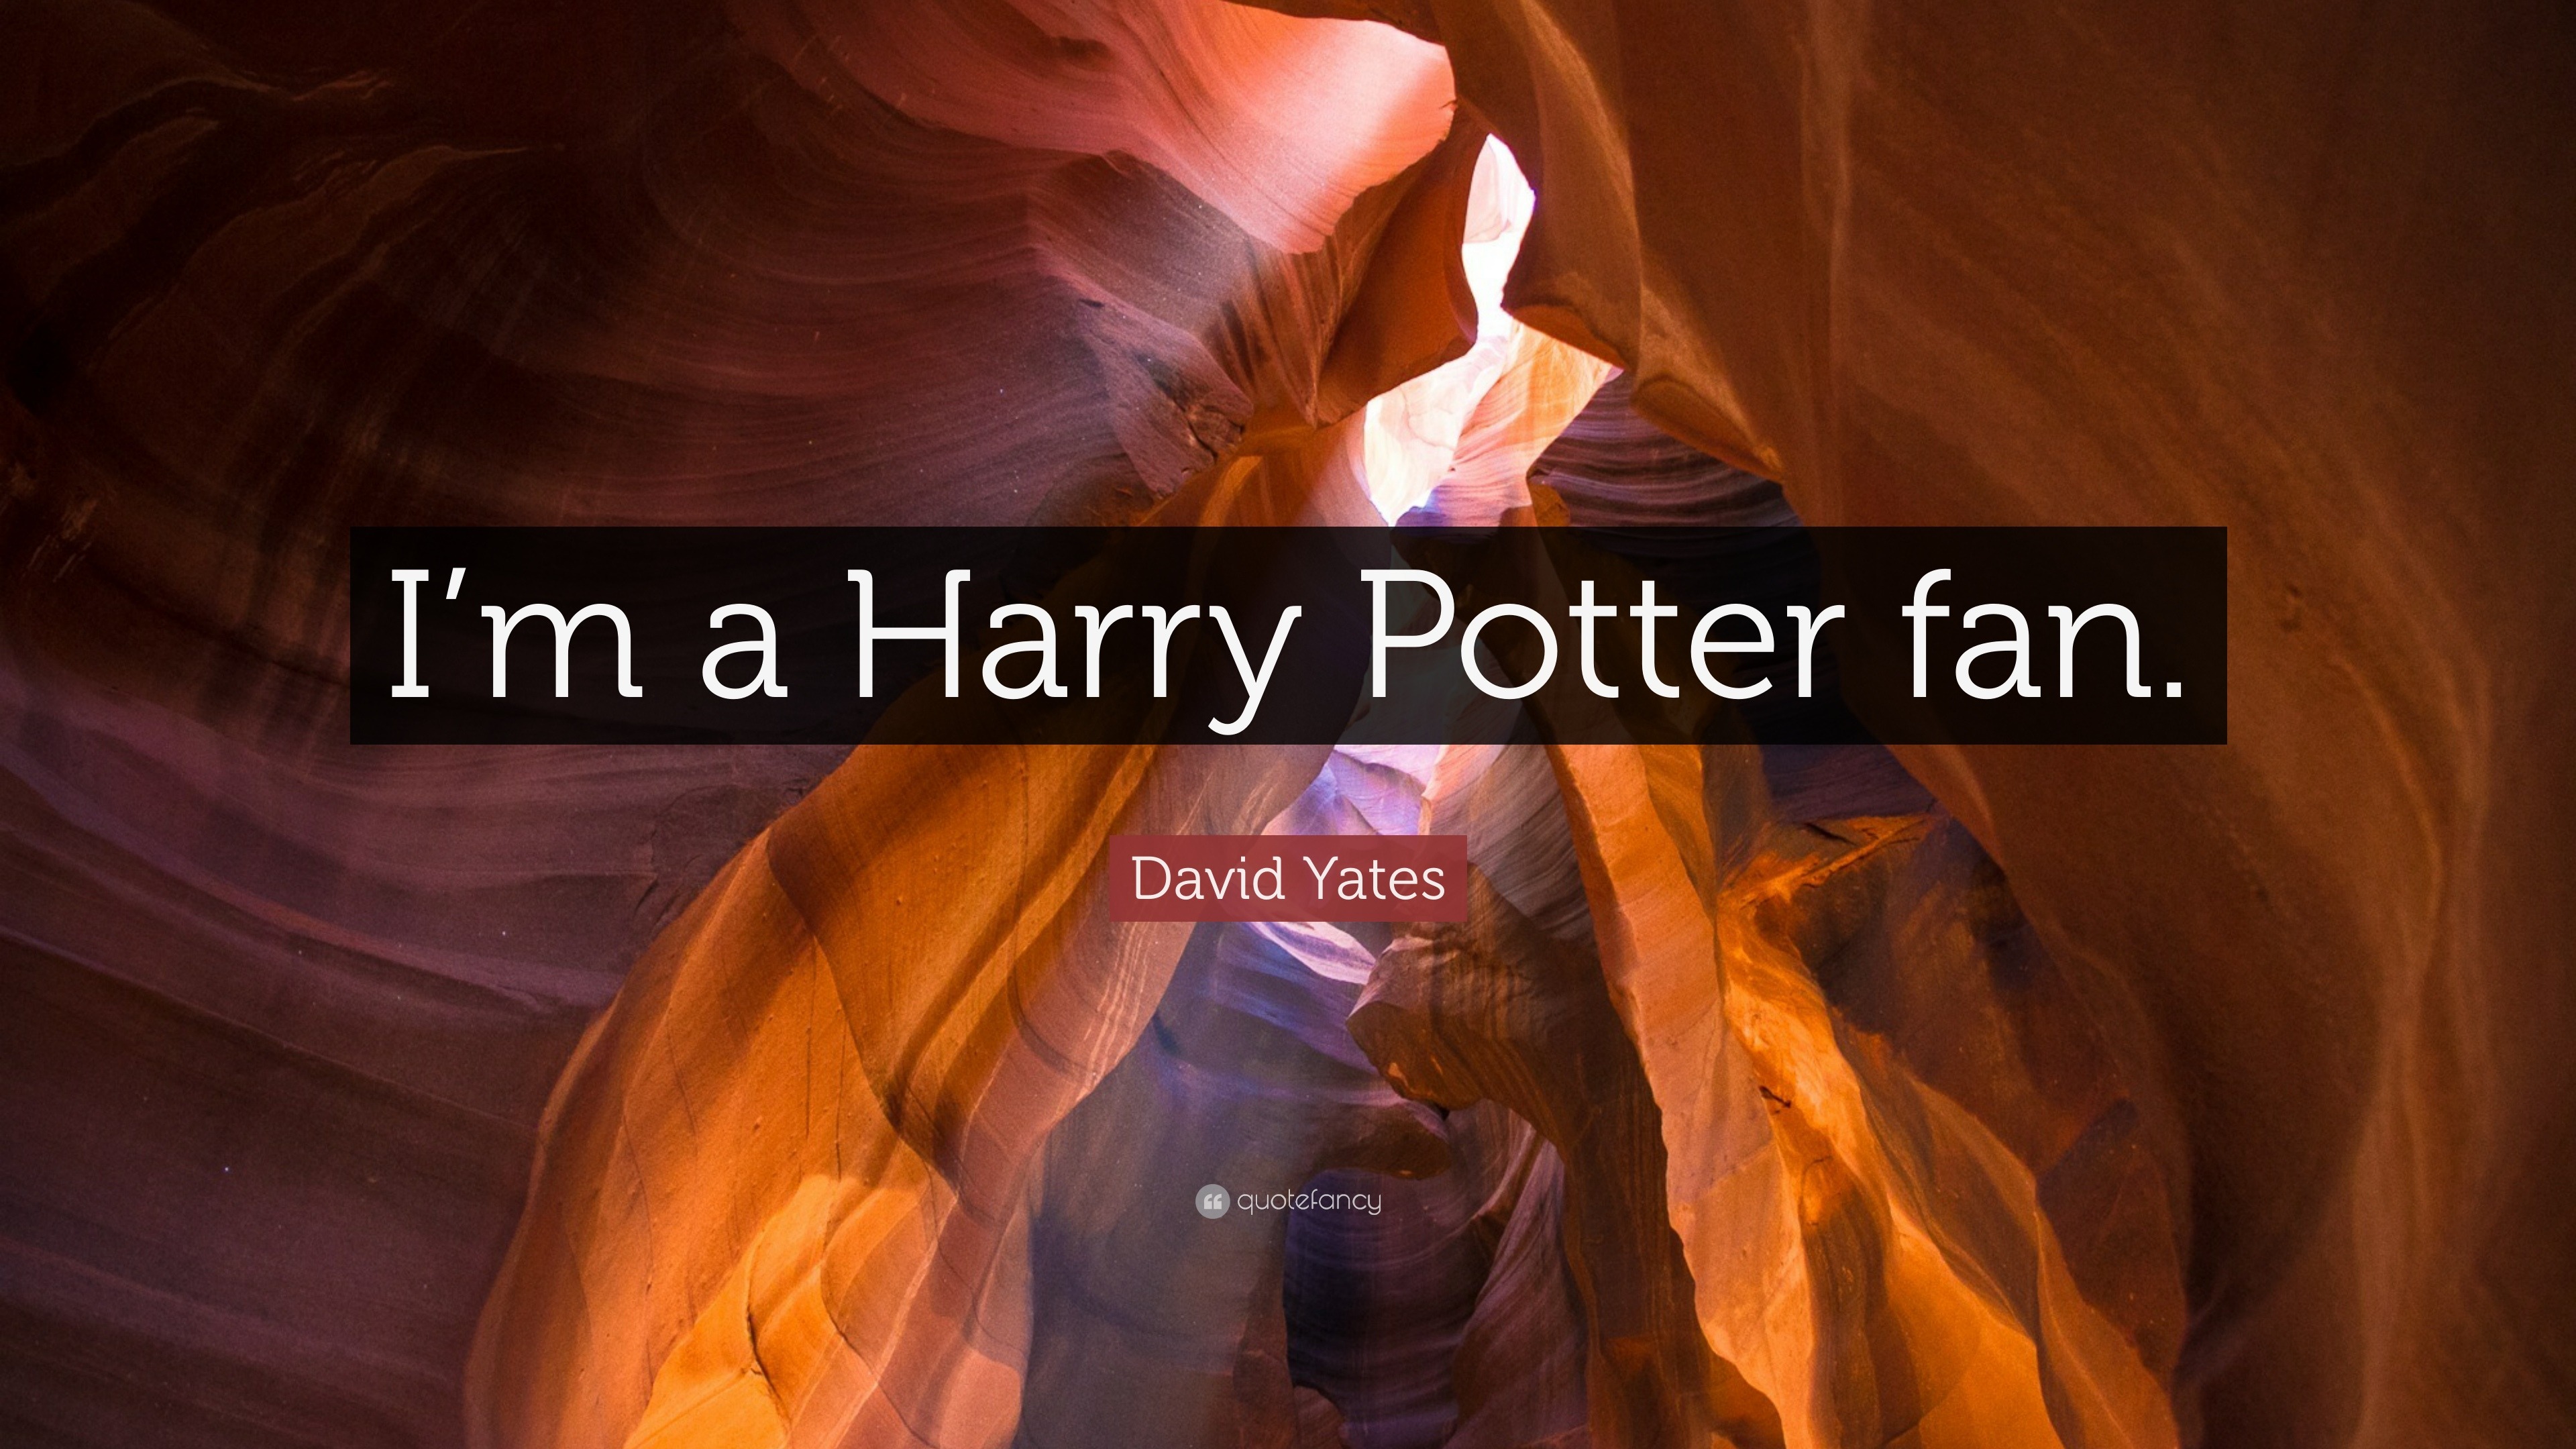 Yates Quote: a Harry Potter